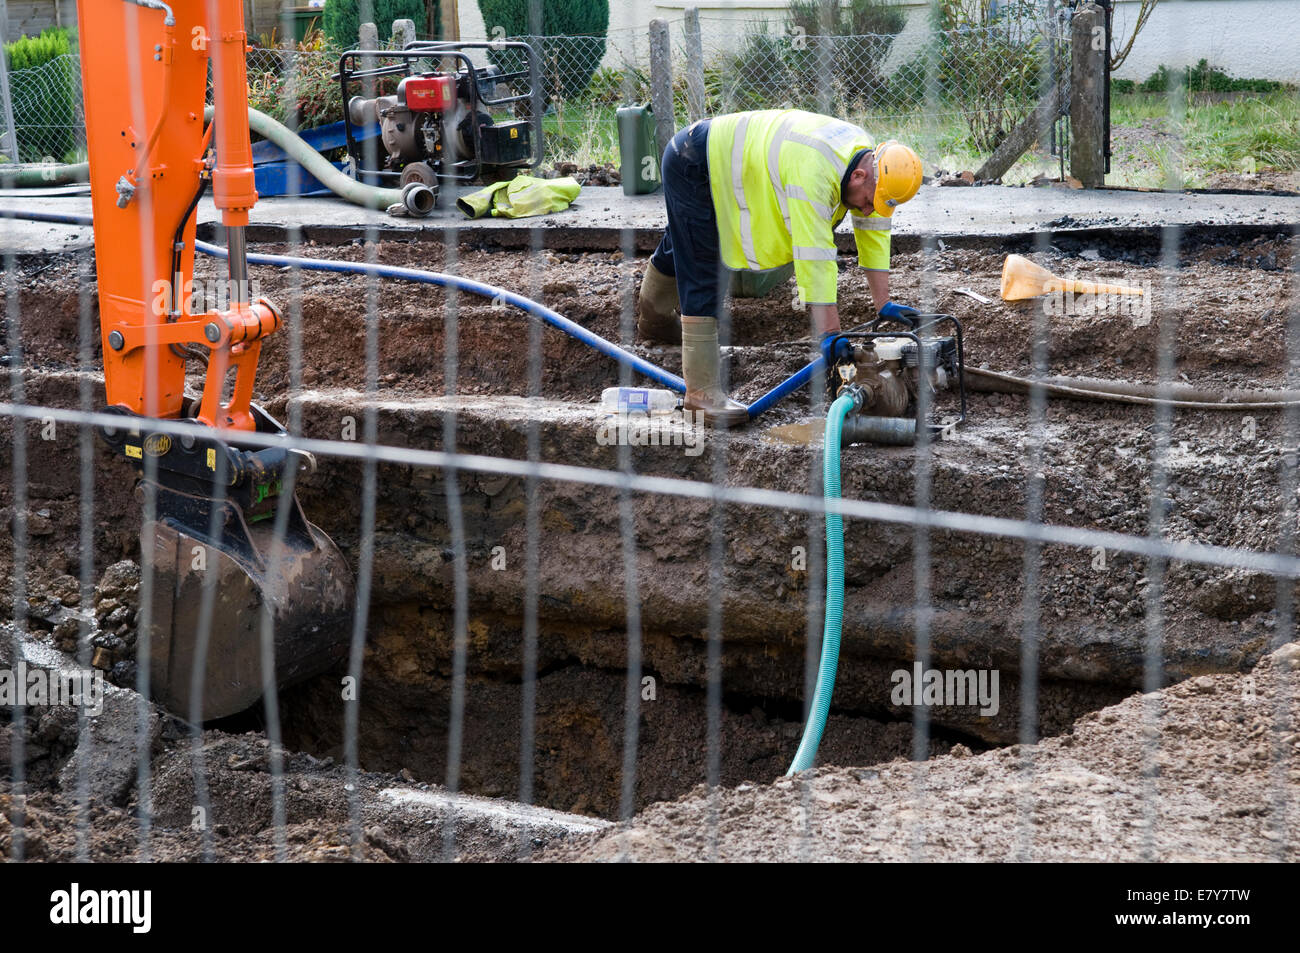 Bristol, UK. 26th Sep, 2014. Site of burst water mains at Fisher Rd, Kingswood, Bristol, UK, which has left thousands of people in East Bristol without water overnight and continues today as Bristol Water work to restore service, but still no estimated fix time. Credit:  Rachel Husband/Alamy Live News Stock Photo